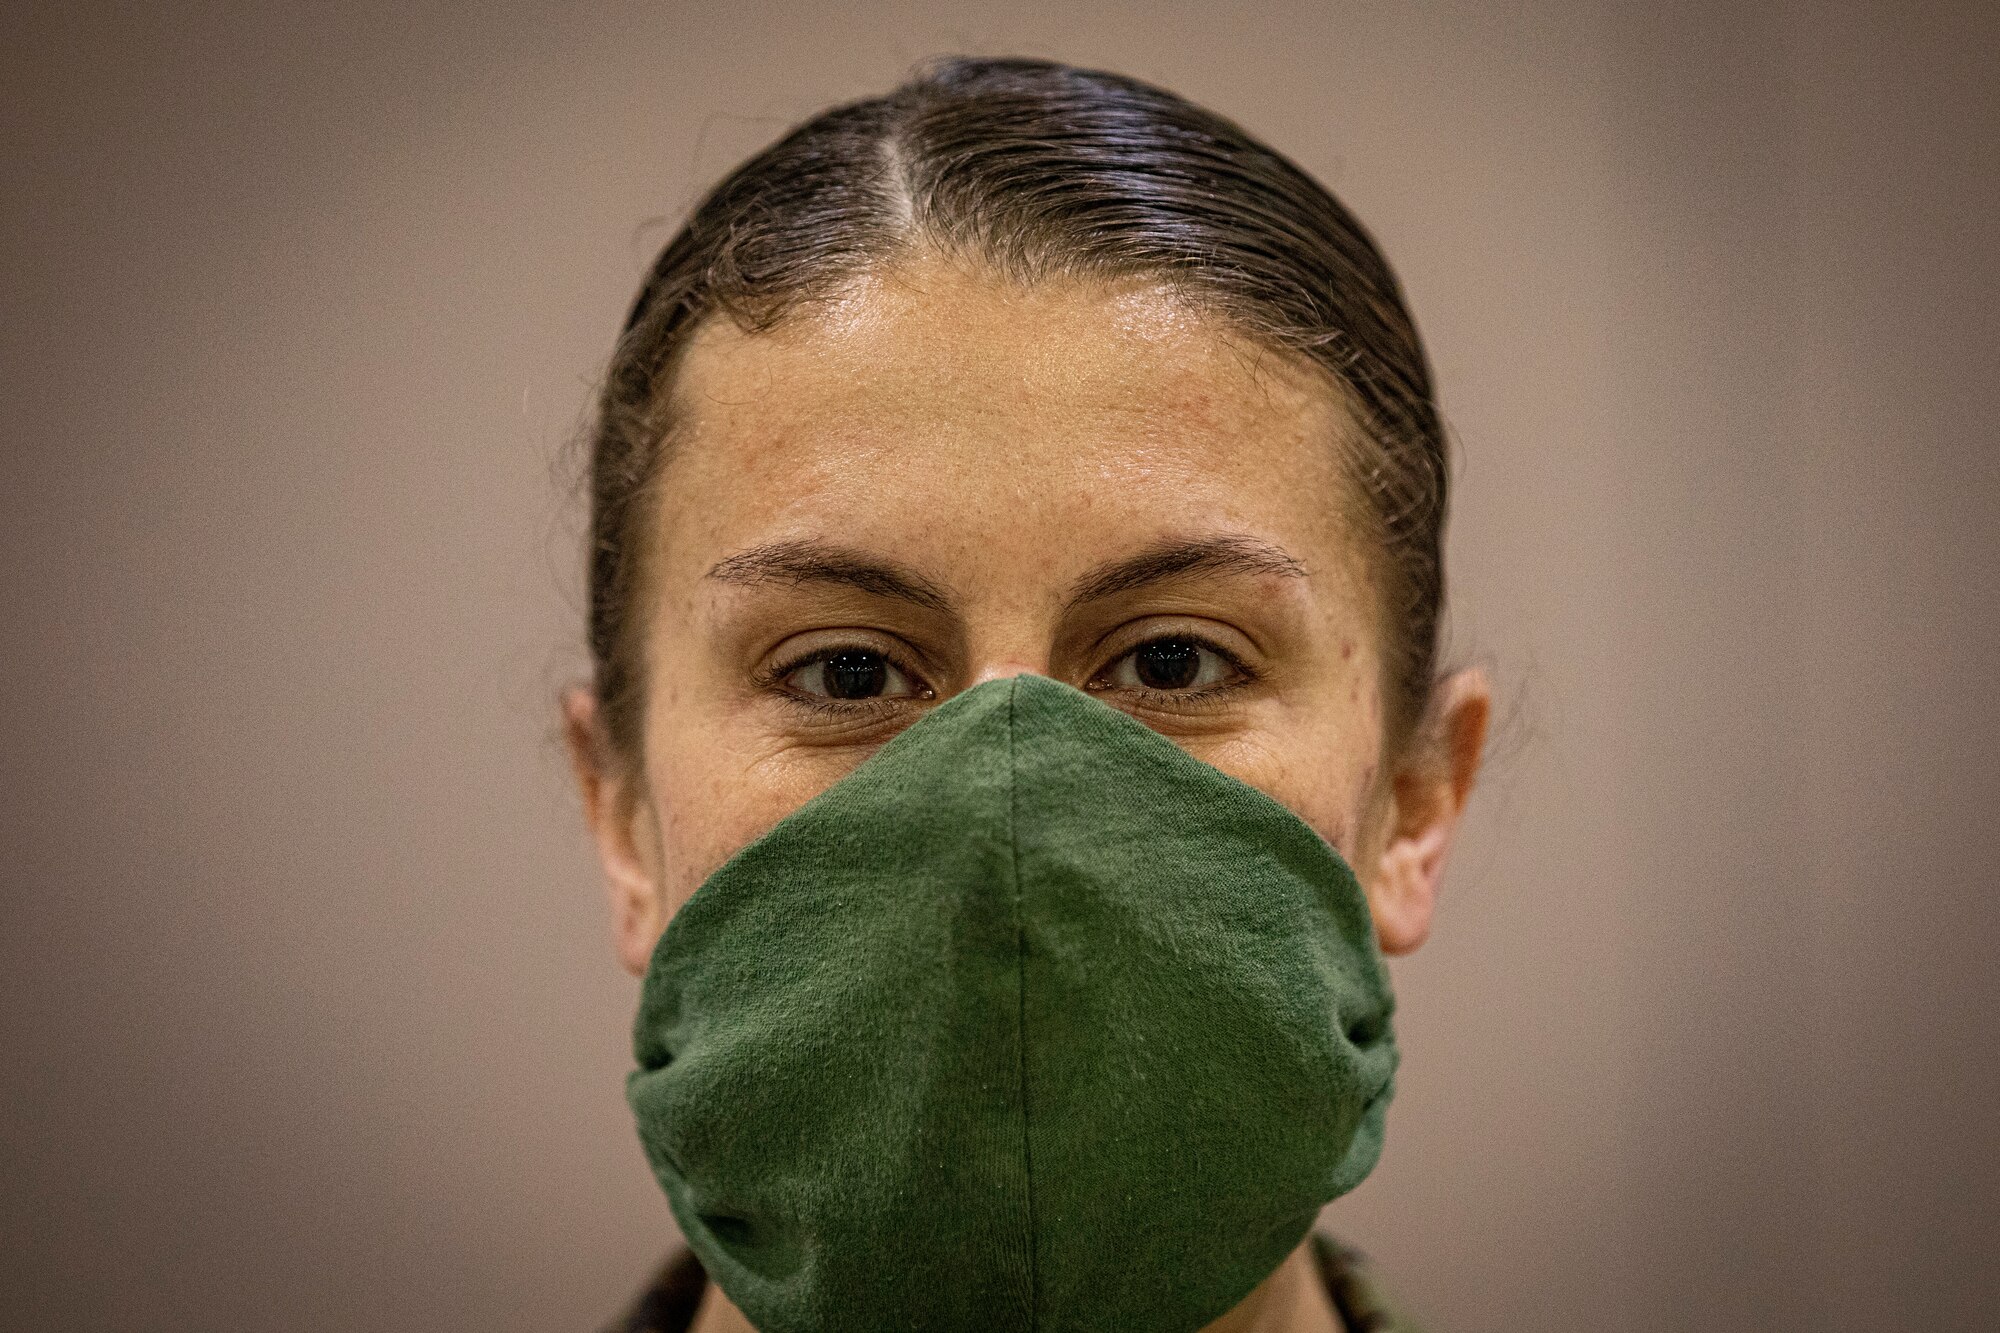 A New Jersey Air National Guard Airman stands for a portrait during the buildup of a Field Medical Station at the Atlantic City Convention Center in Atlantic City, N.J., April 9, 2020.  Atlantic City is one of three stations that will offer overflow from local hospitals focused on COVID-19 patients. (U.S. Air National Guard photo by Master Sgt. Matt Hecht)